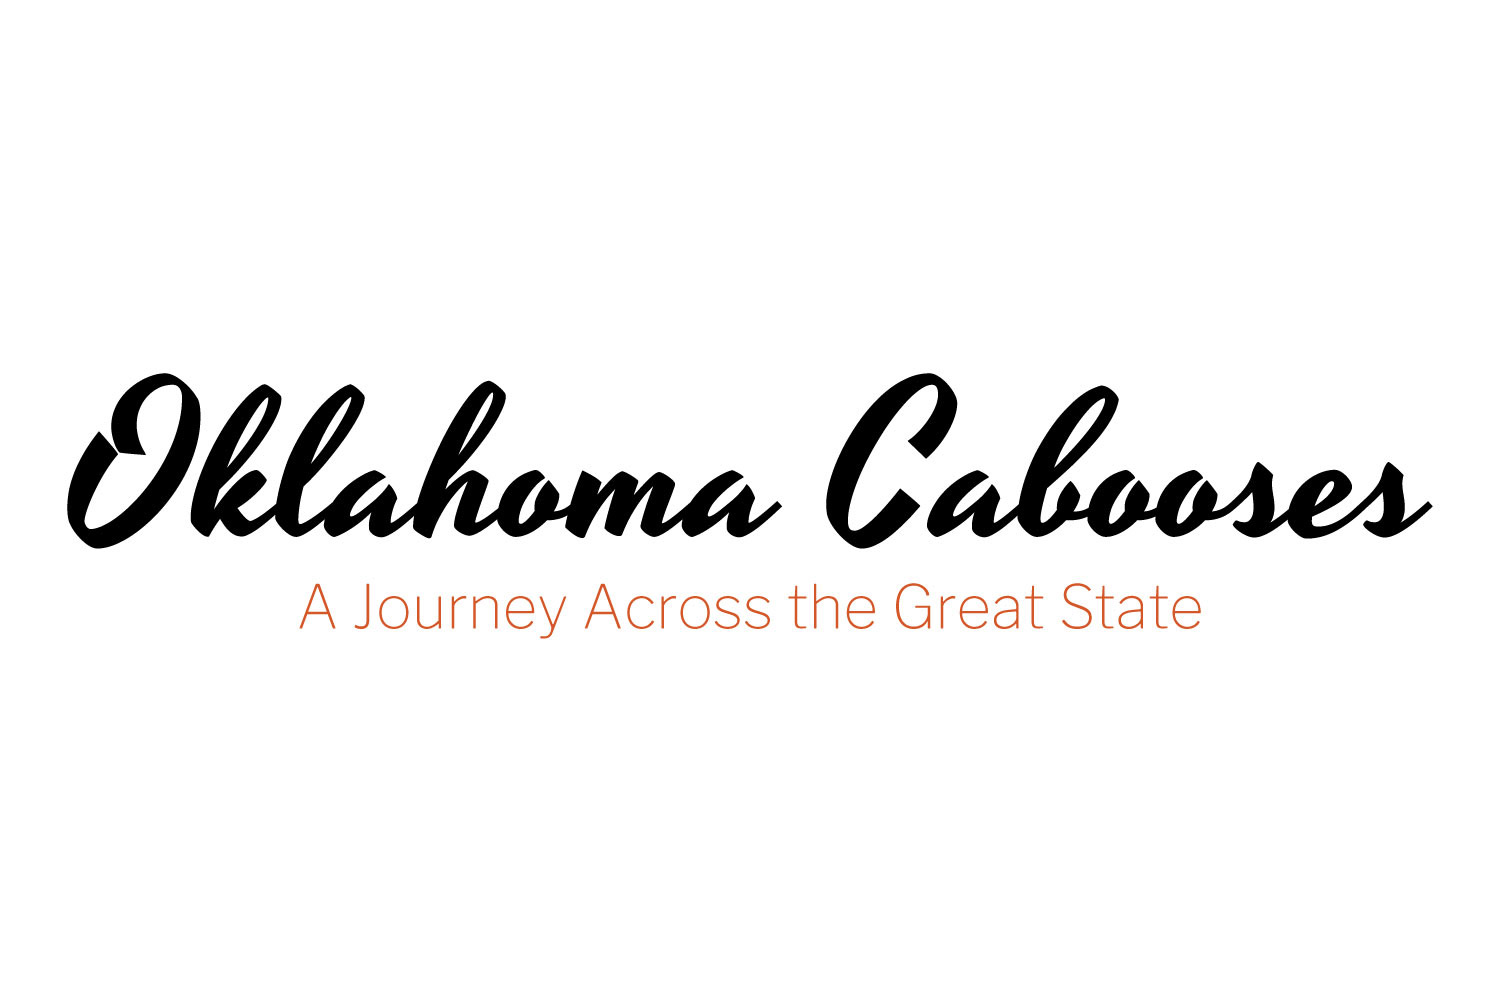 Welcome to Oklahoma Cabooses!AC